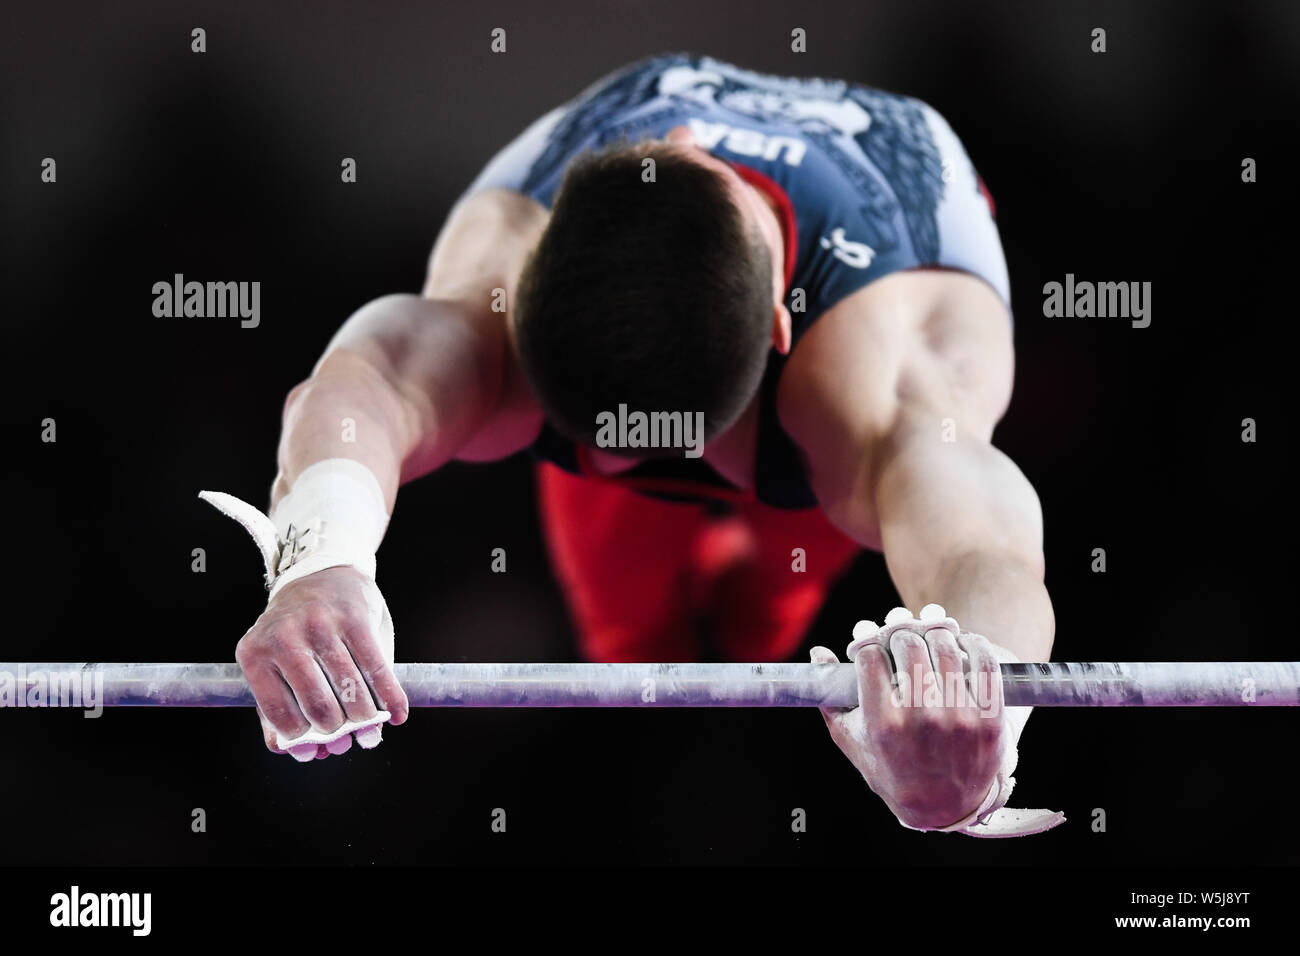 July 28, 2019, Lima, Peru: BRODY MALONE from the US competes on the high bar during the team finals competition held in the Polideportivo Villa El Salvador in Lima, Peru. Credit: Amy Sanderson/ZUMA Wire/Alamy Live News Stock Photo